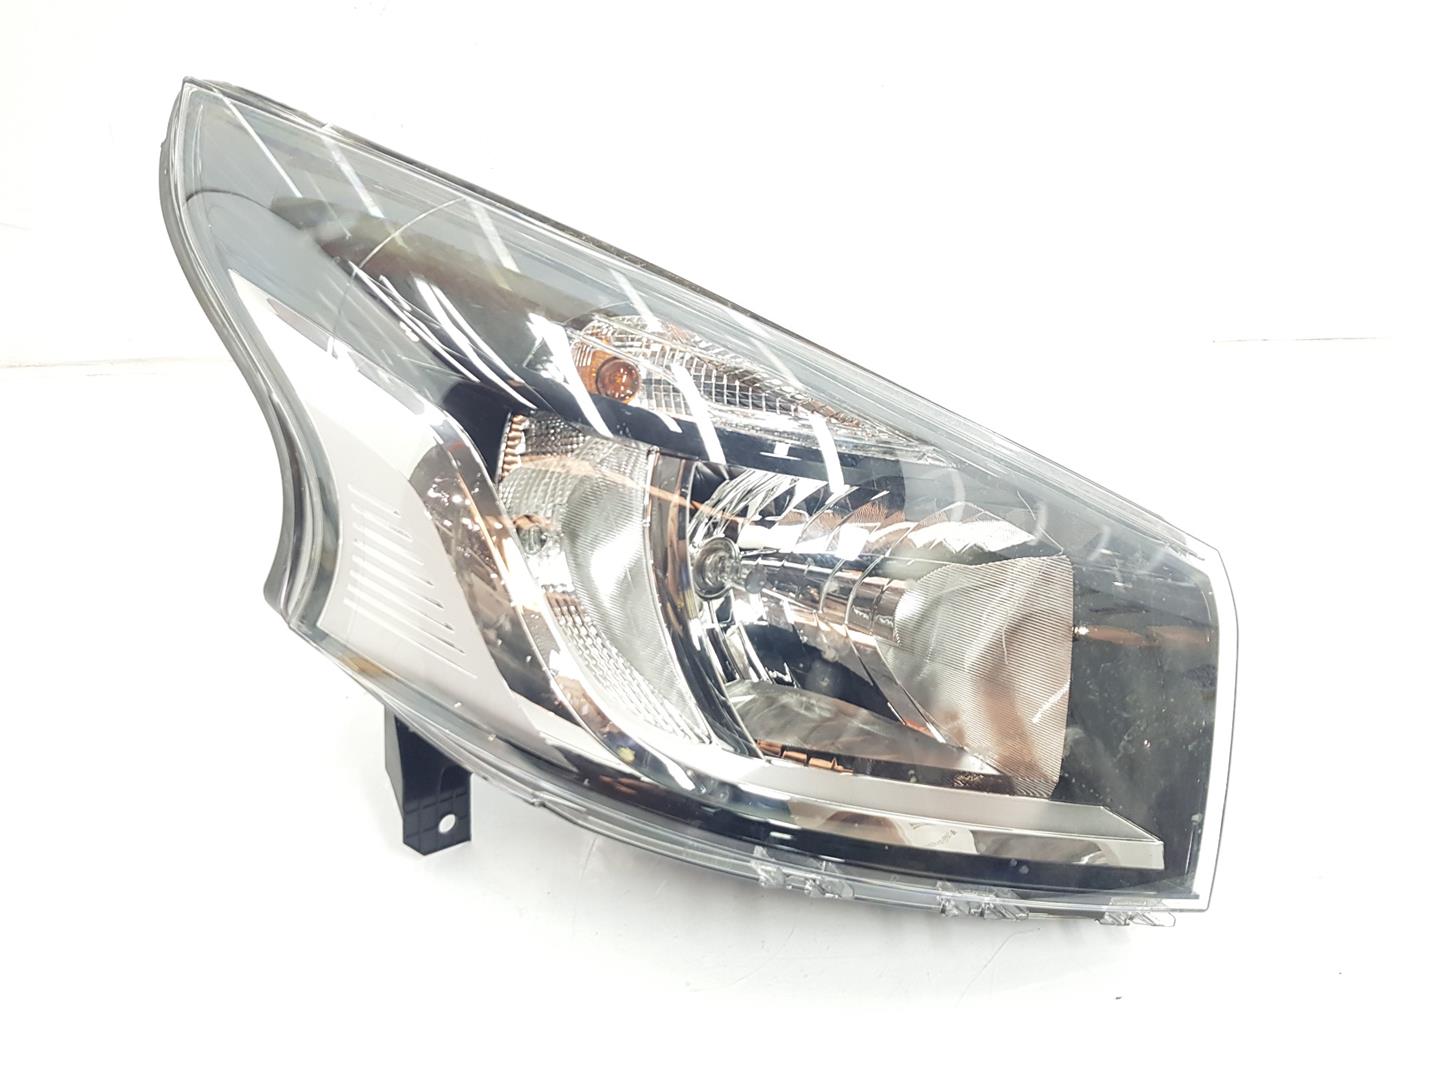 RENAULT Trafic 2 generation (2001-2015) Front Right Headlight 260109424R, 1EE011410-22, 2222DL 19890686